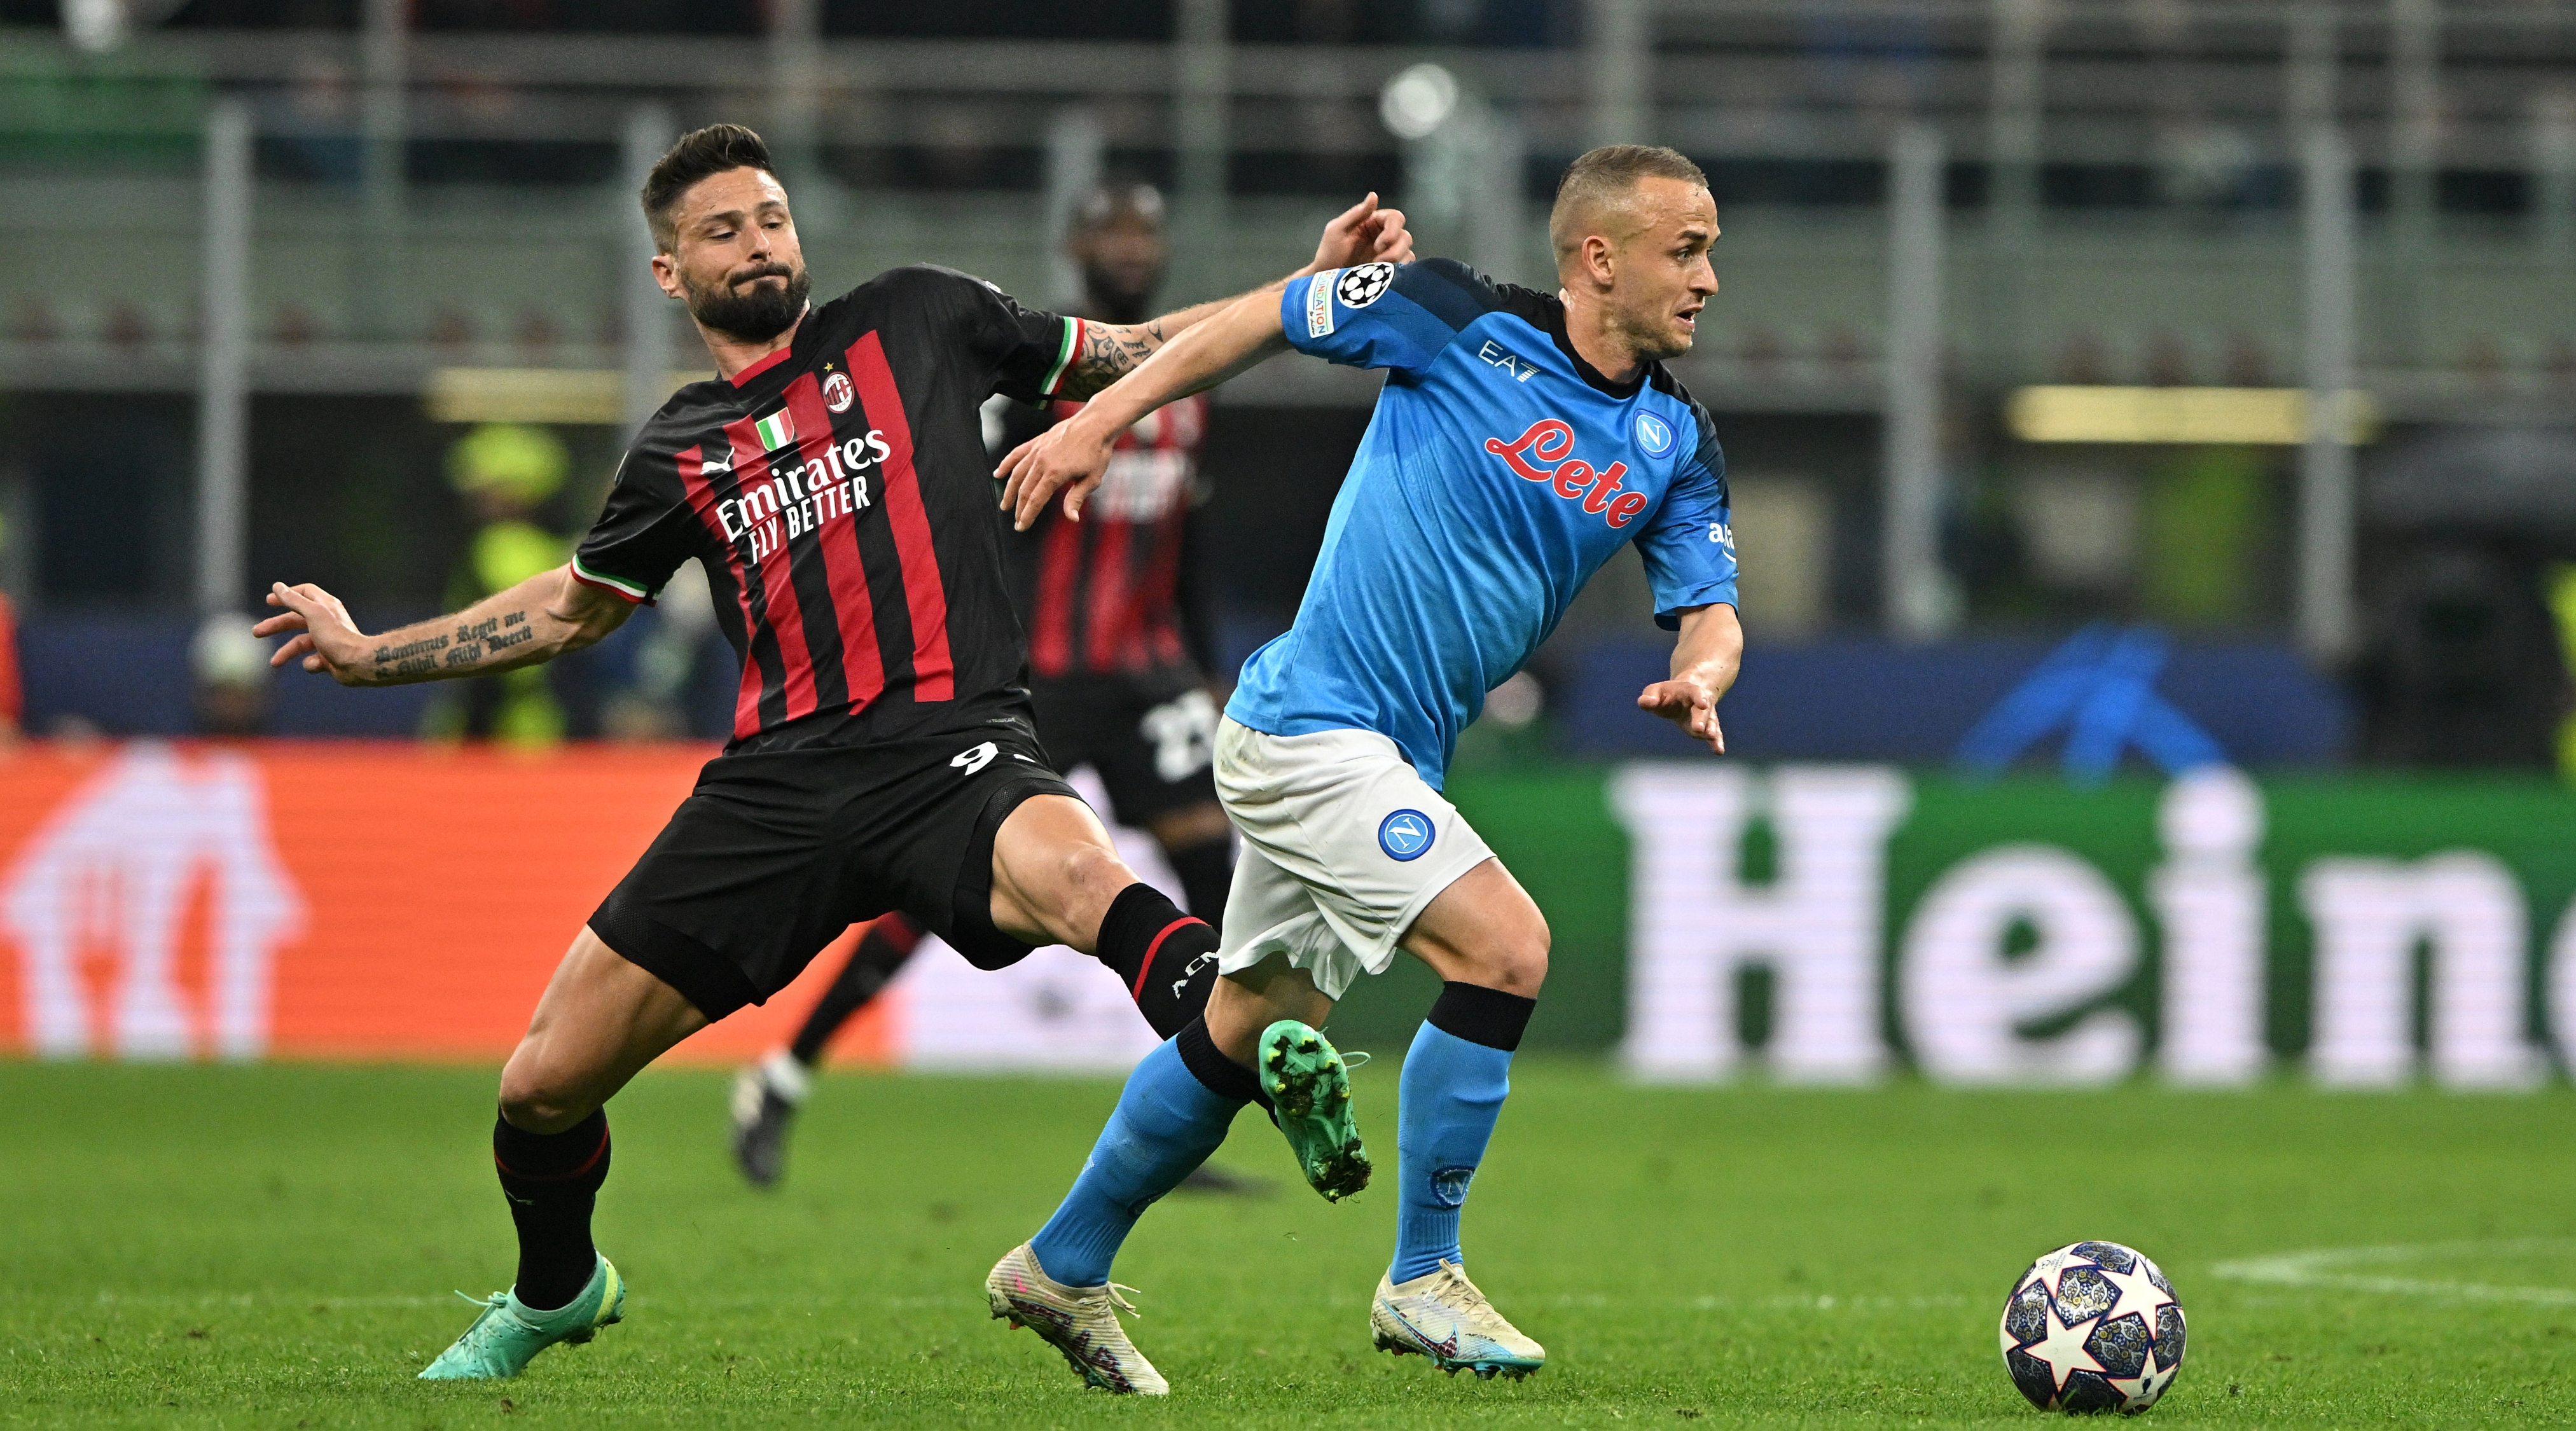 Napoli vs AC Milan live stream, match preview, team news and kick-off time for this Champions League match FourFourTwo